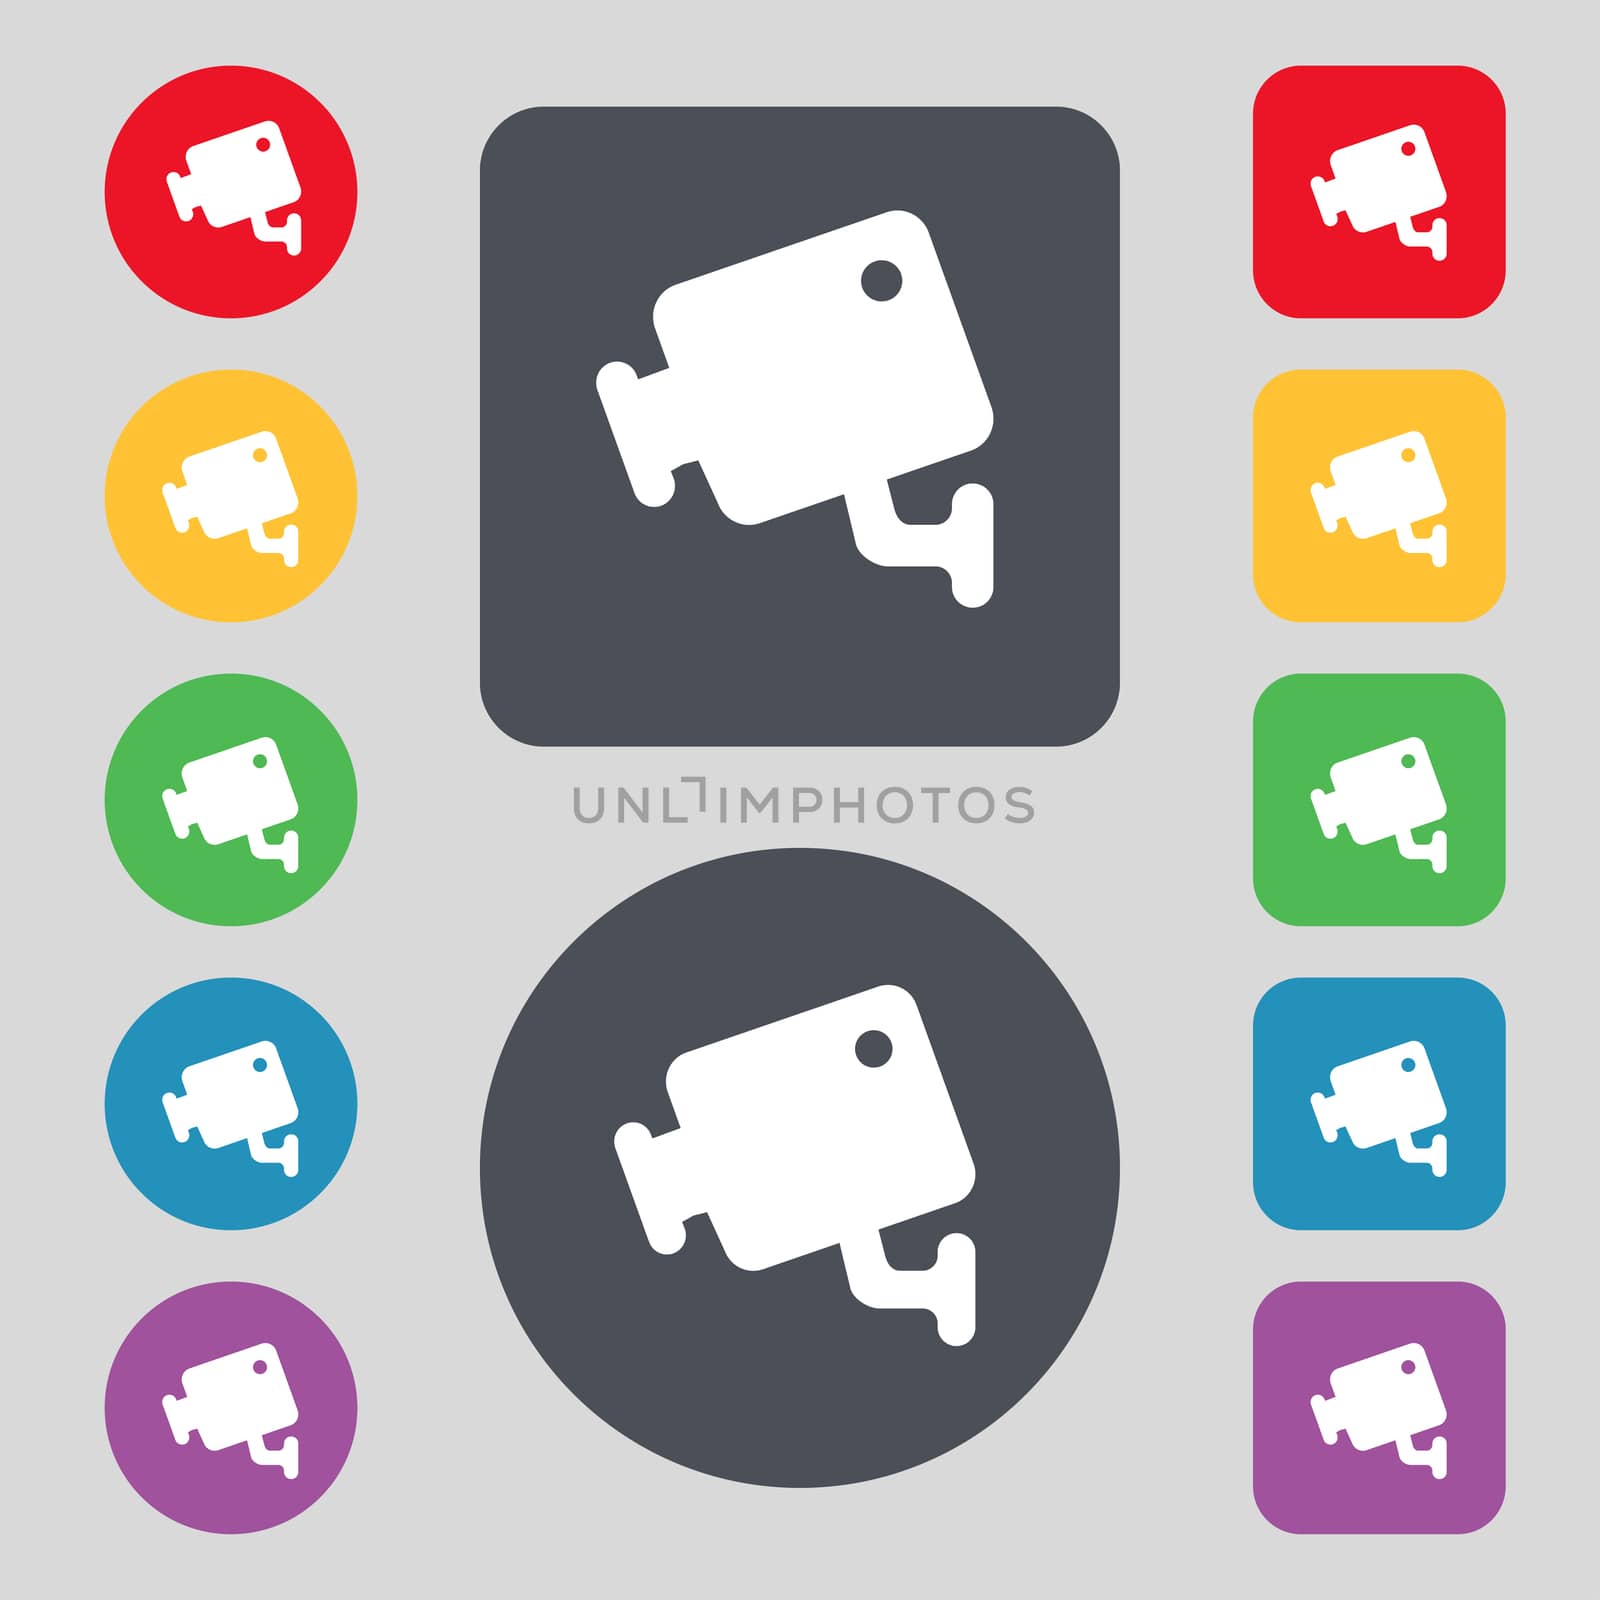 video camera icon sign. A set of 12 colored buttons. Flat design. illustration